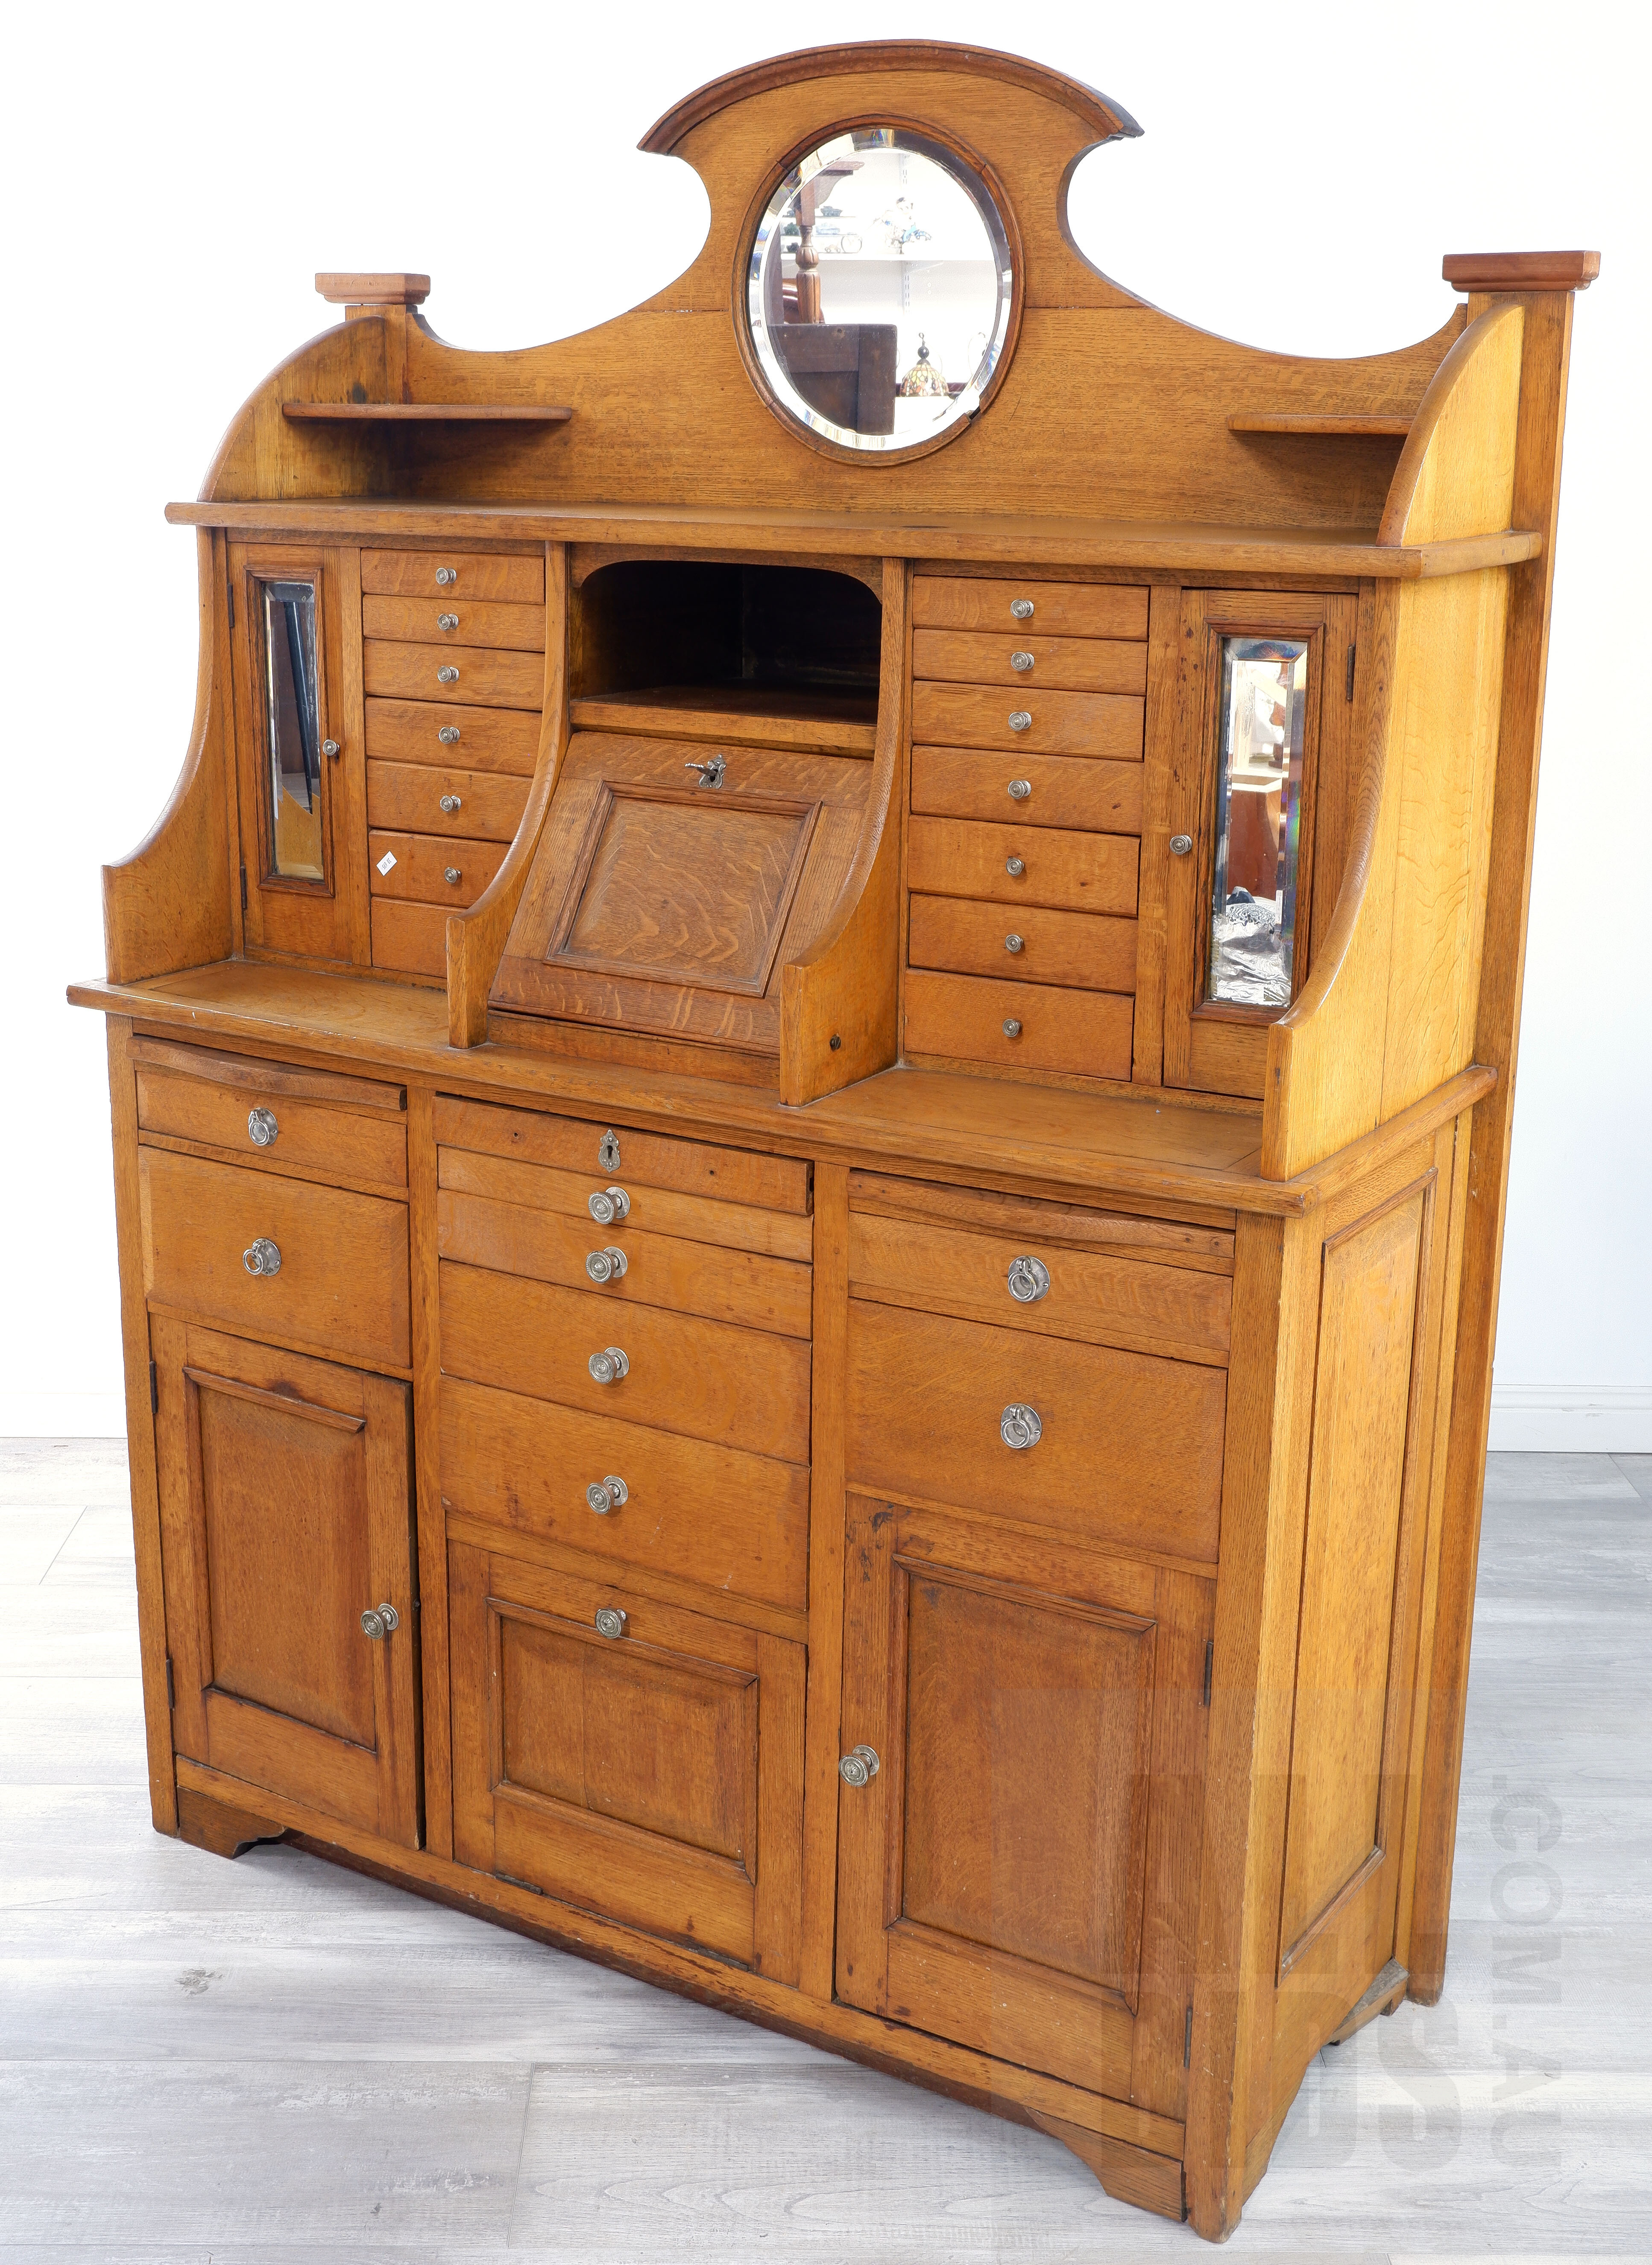 'Early 20th Century Oak Dentist Cabinet with Custom Tool Drawers, Beveled Glass Mirrors and Metal Lined Drawer'